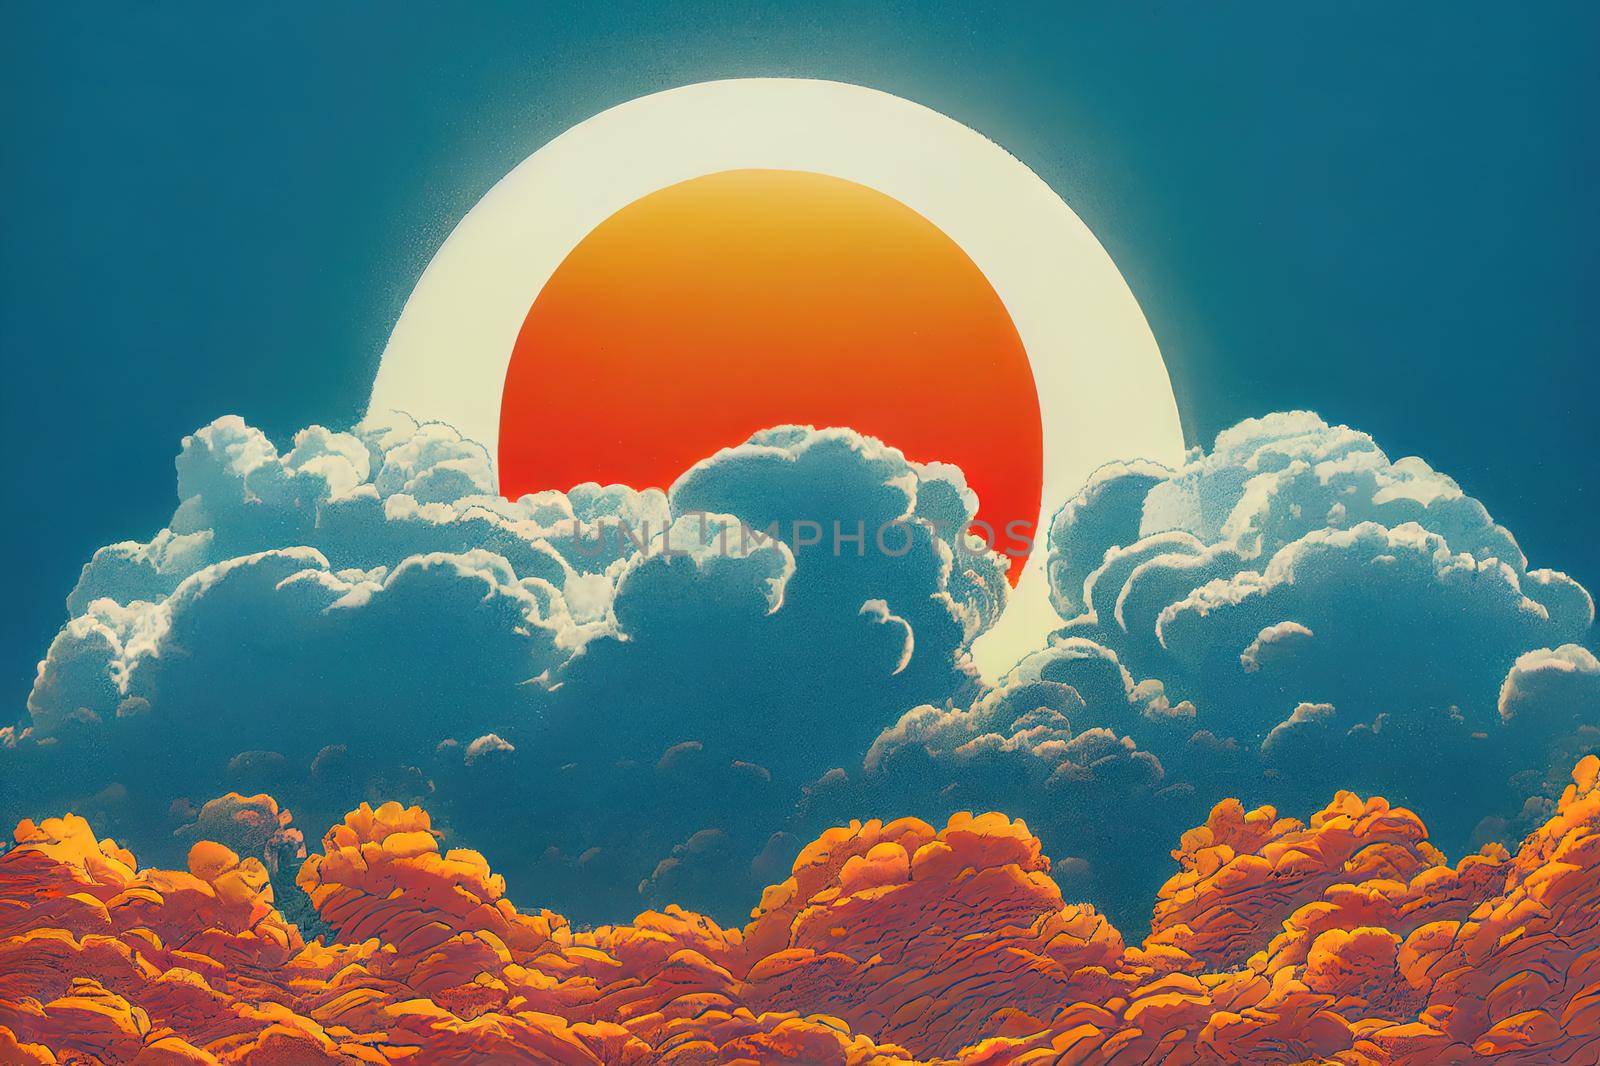 Sky blue and orange light of the sun through the clouds in the sky. High quality illustration